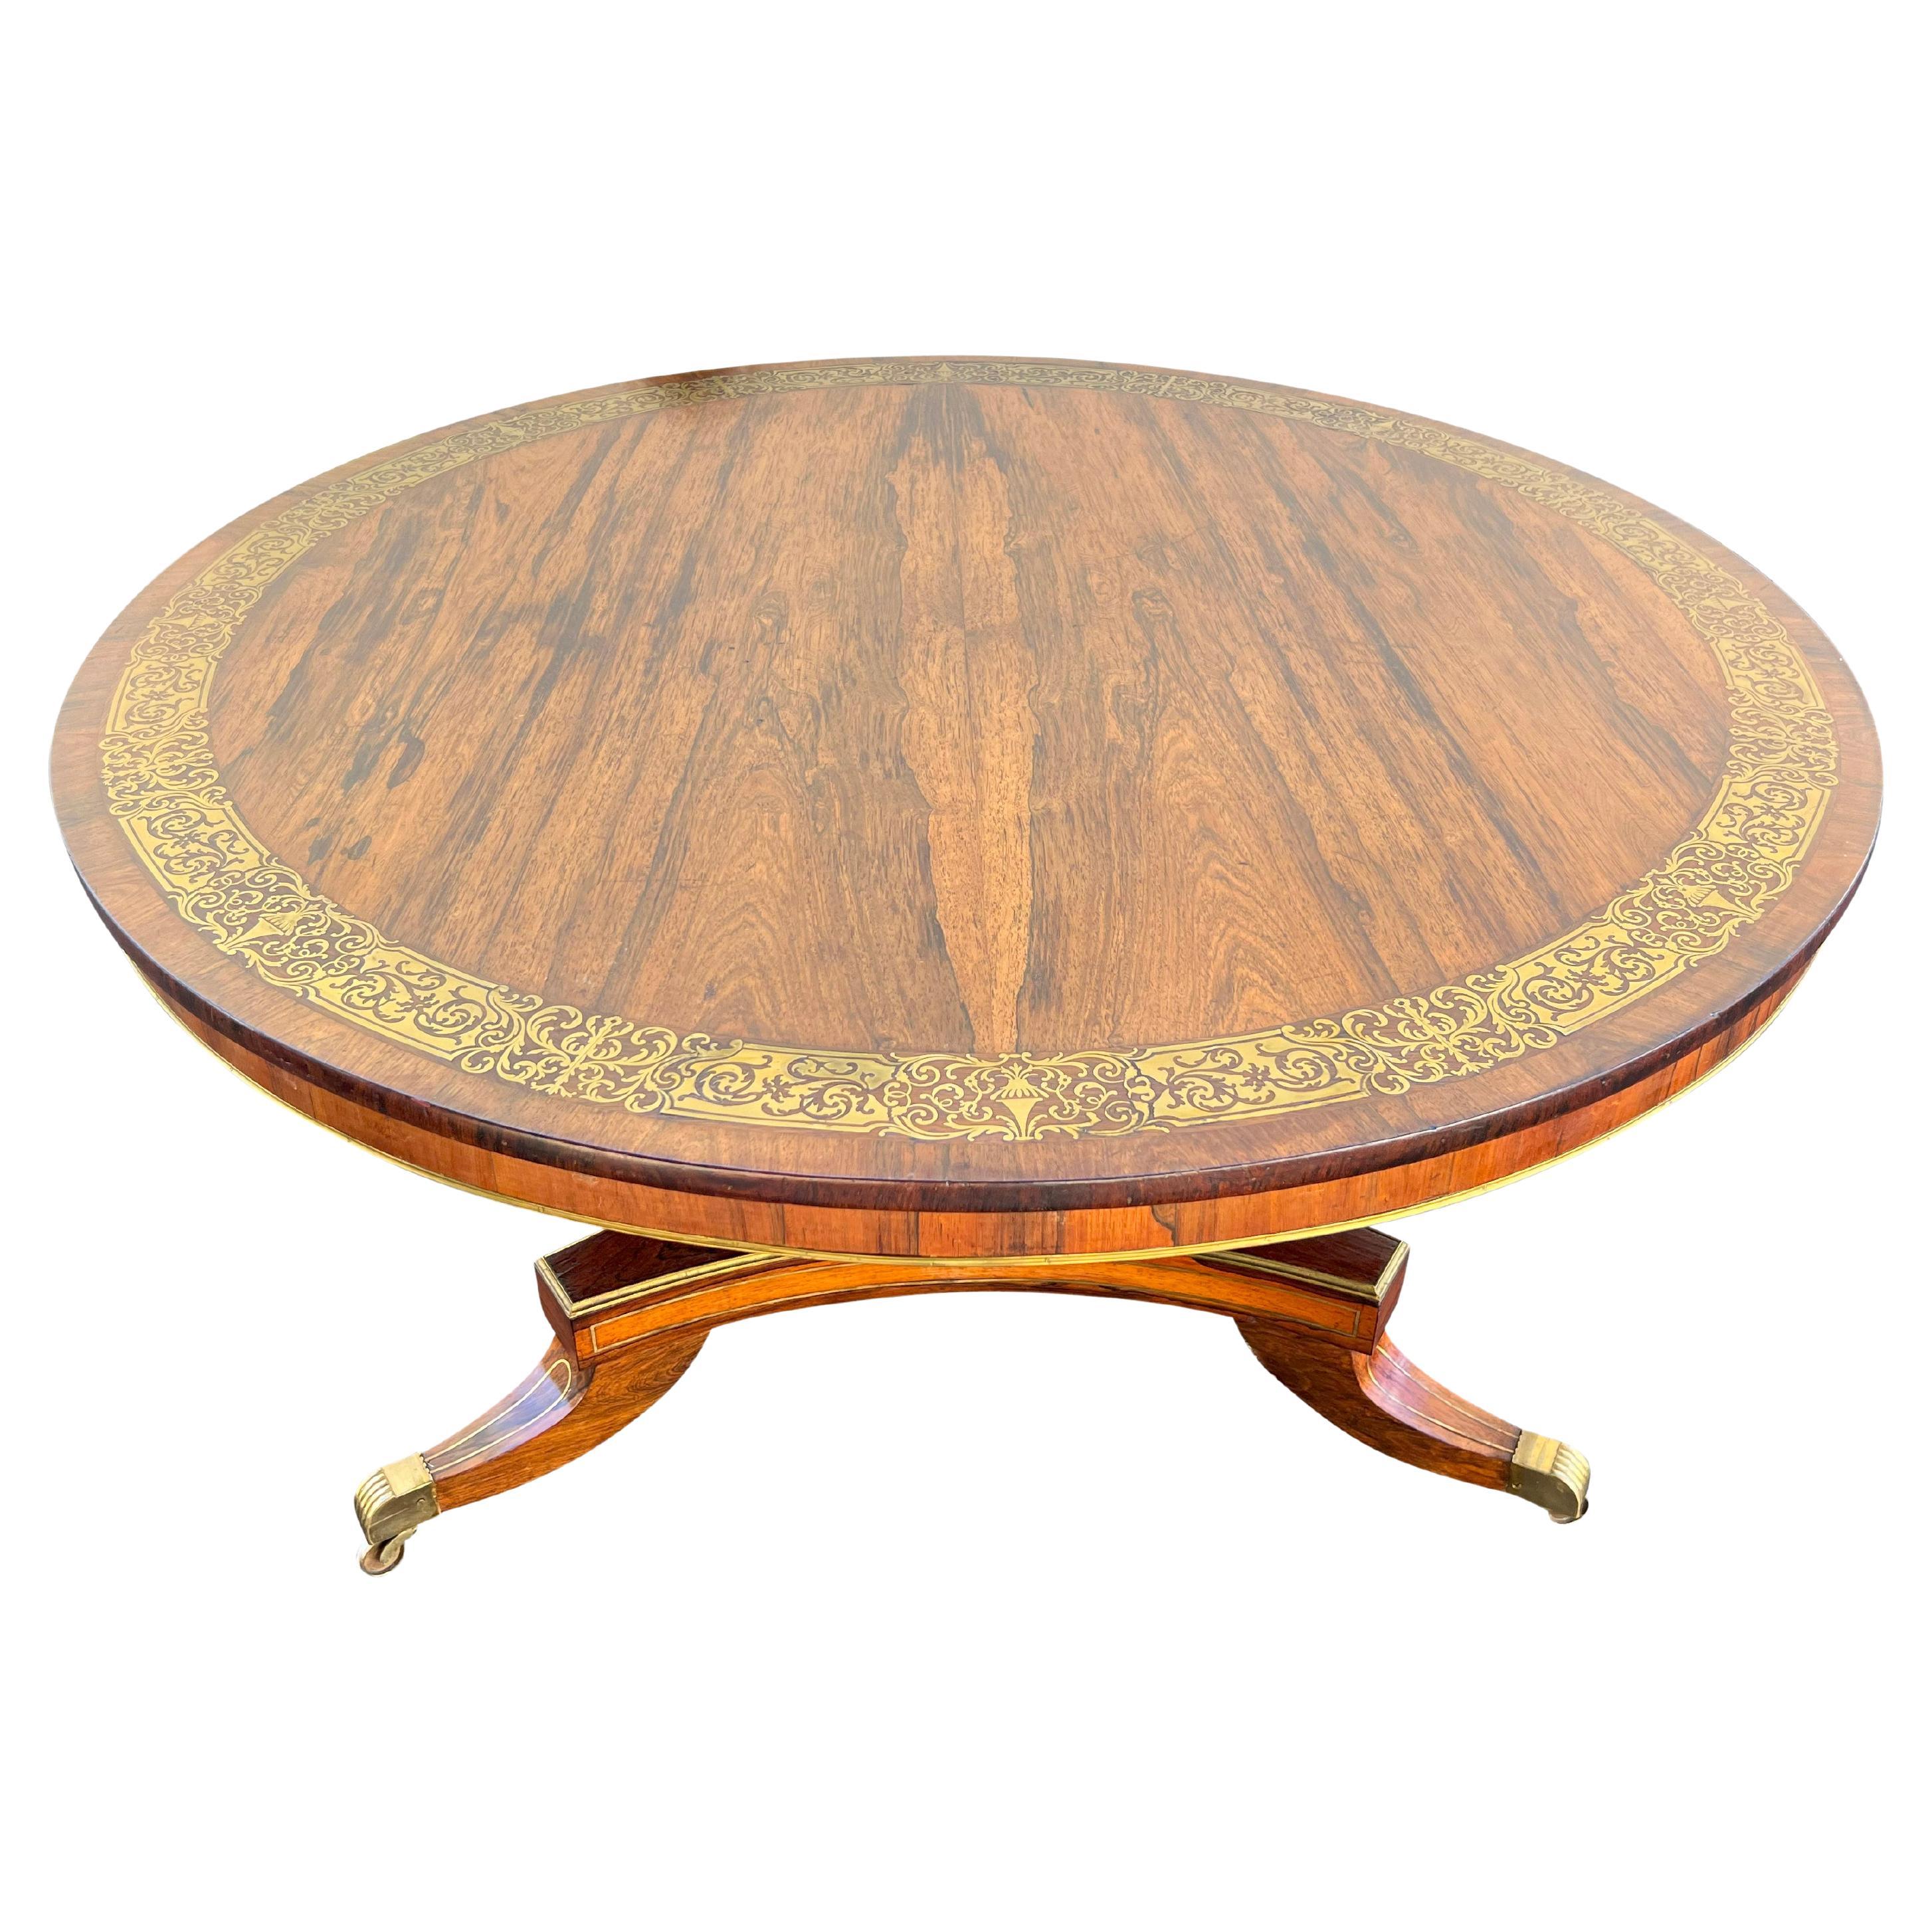 Circular tiltable top with brass inlaid banding with conforming apron on a flat sided brass 
mounted columnar support joining a brass mounted tripartite plinth base raised on three saber legs with brass casters.